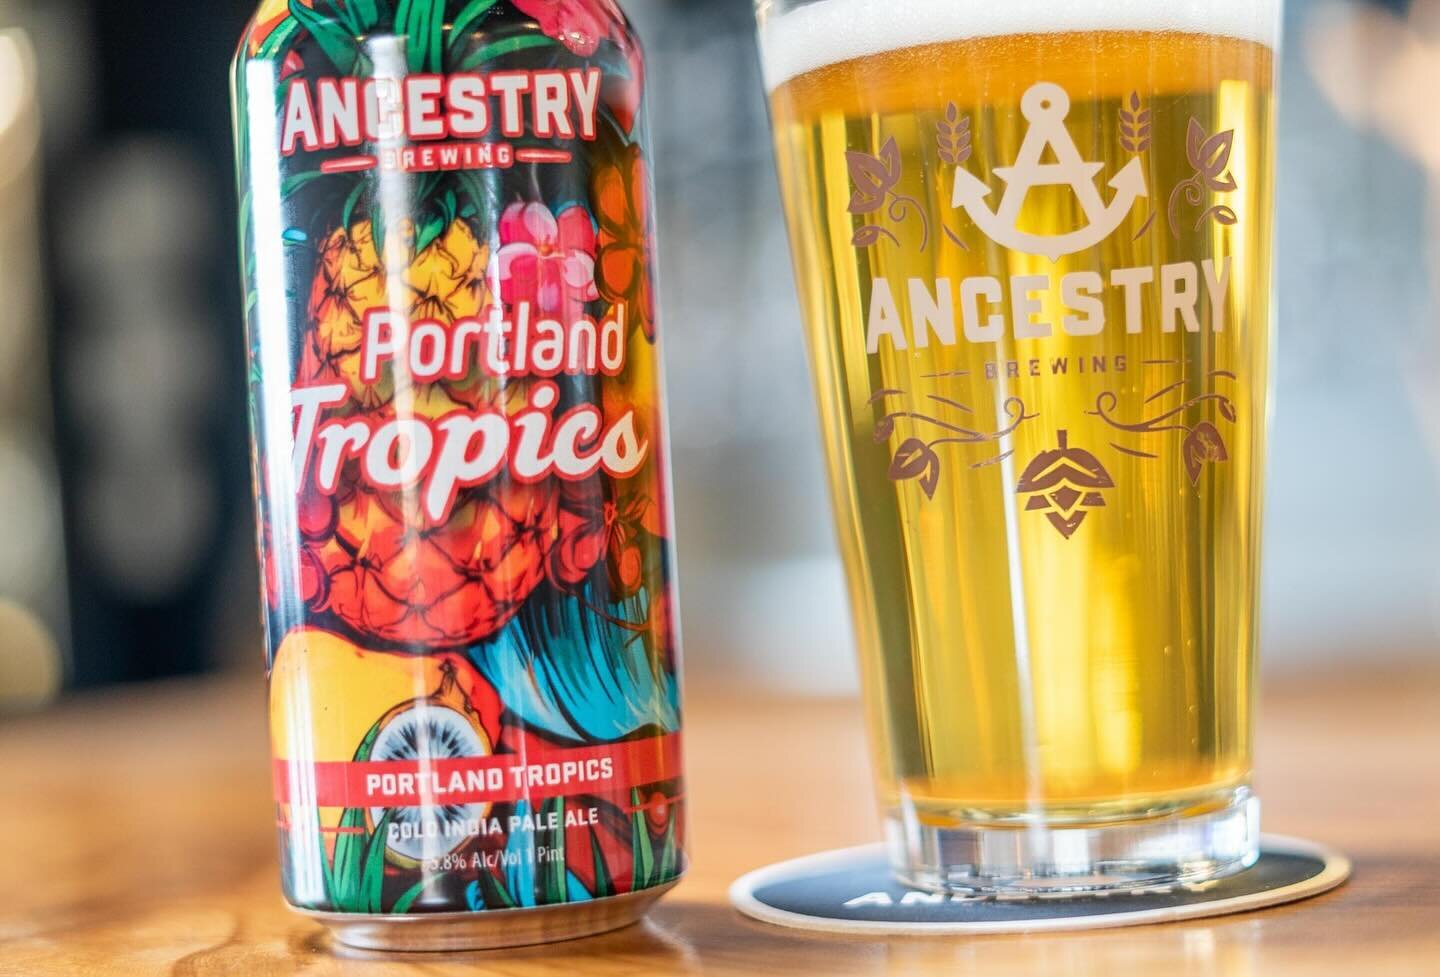 New beer on tap!!! Come try our Cold IPA, Portland Tropics! Cold lagered, refreshing with tropical hop characteristics.  #pdx #pdxcraftbeer #portlandcraftbeer #pdxfoodies #pdxfoodie #portlandfoodie  #oregoncraftbeer #oregonbeer #oregon #spring  #ance